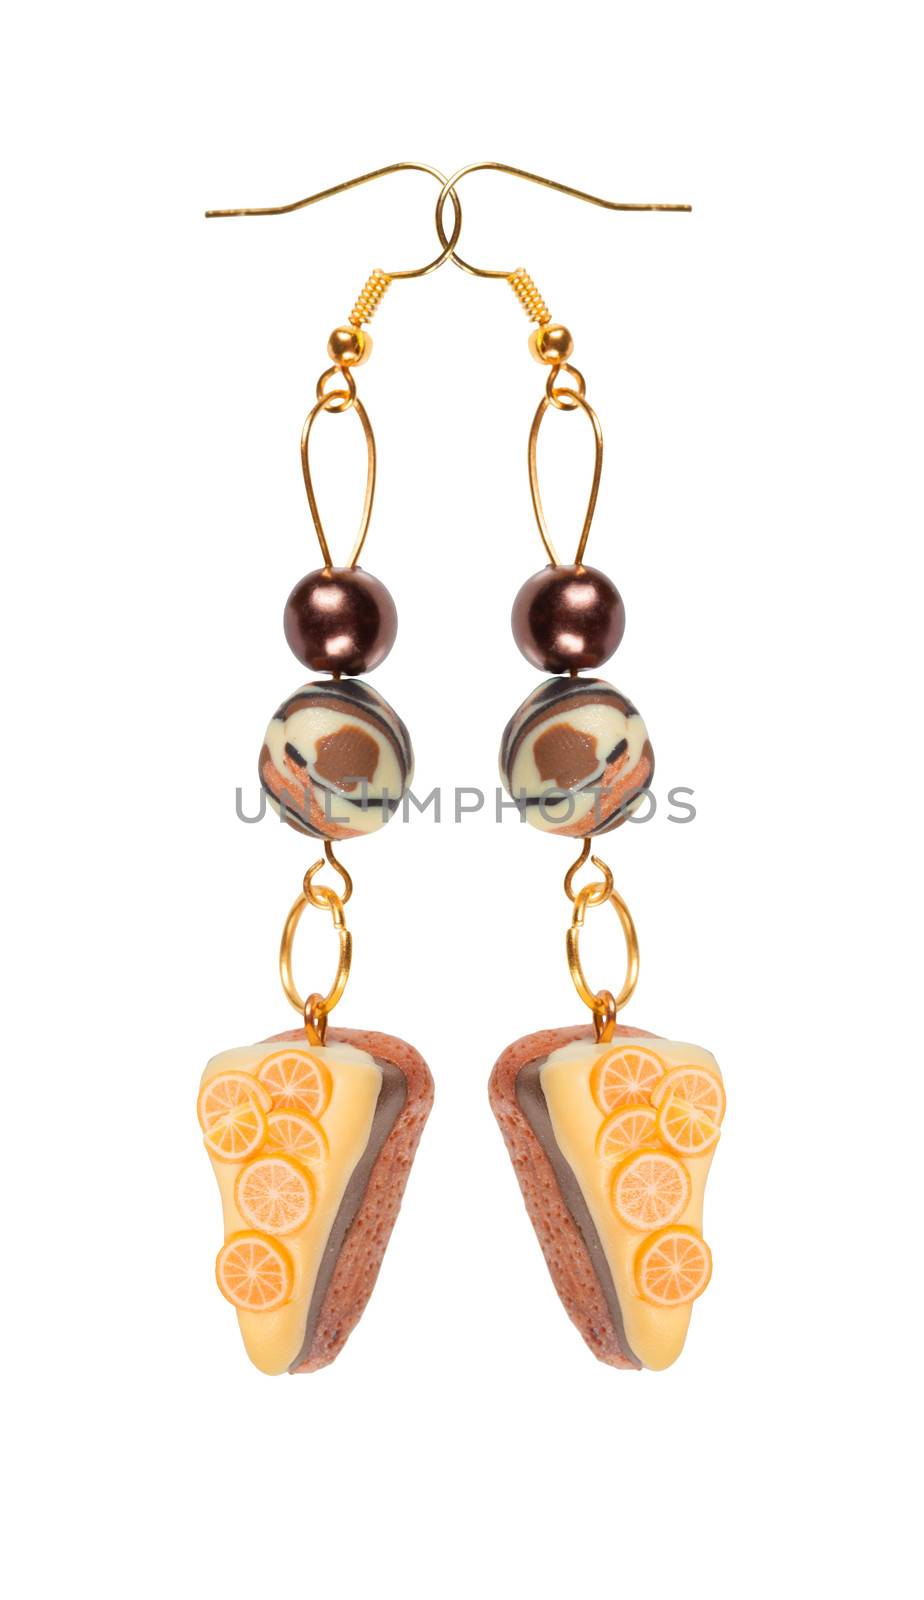 Earrings made of plastic in the form of the cake with lemon Isolated on white background.